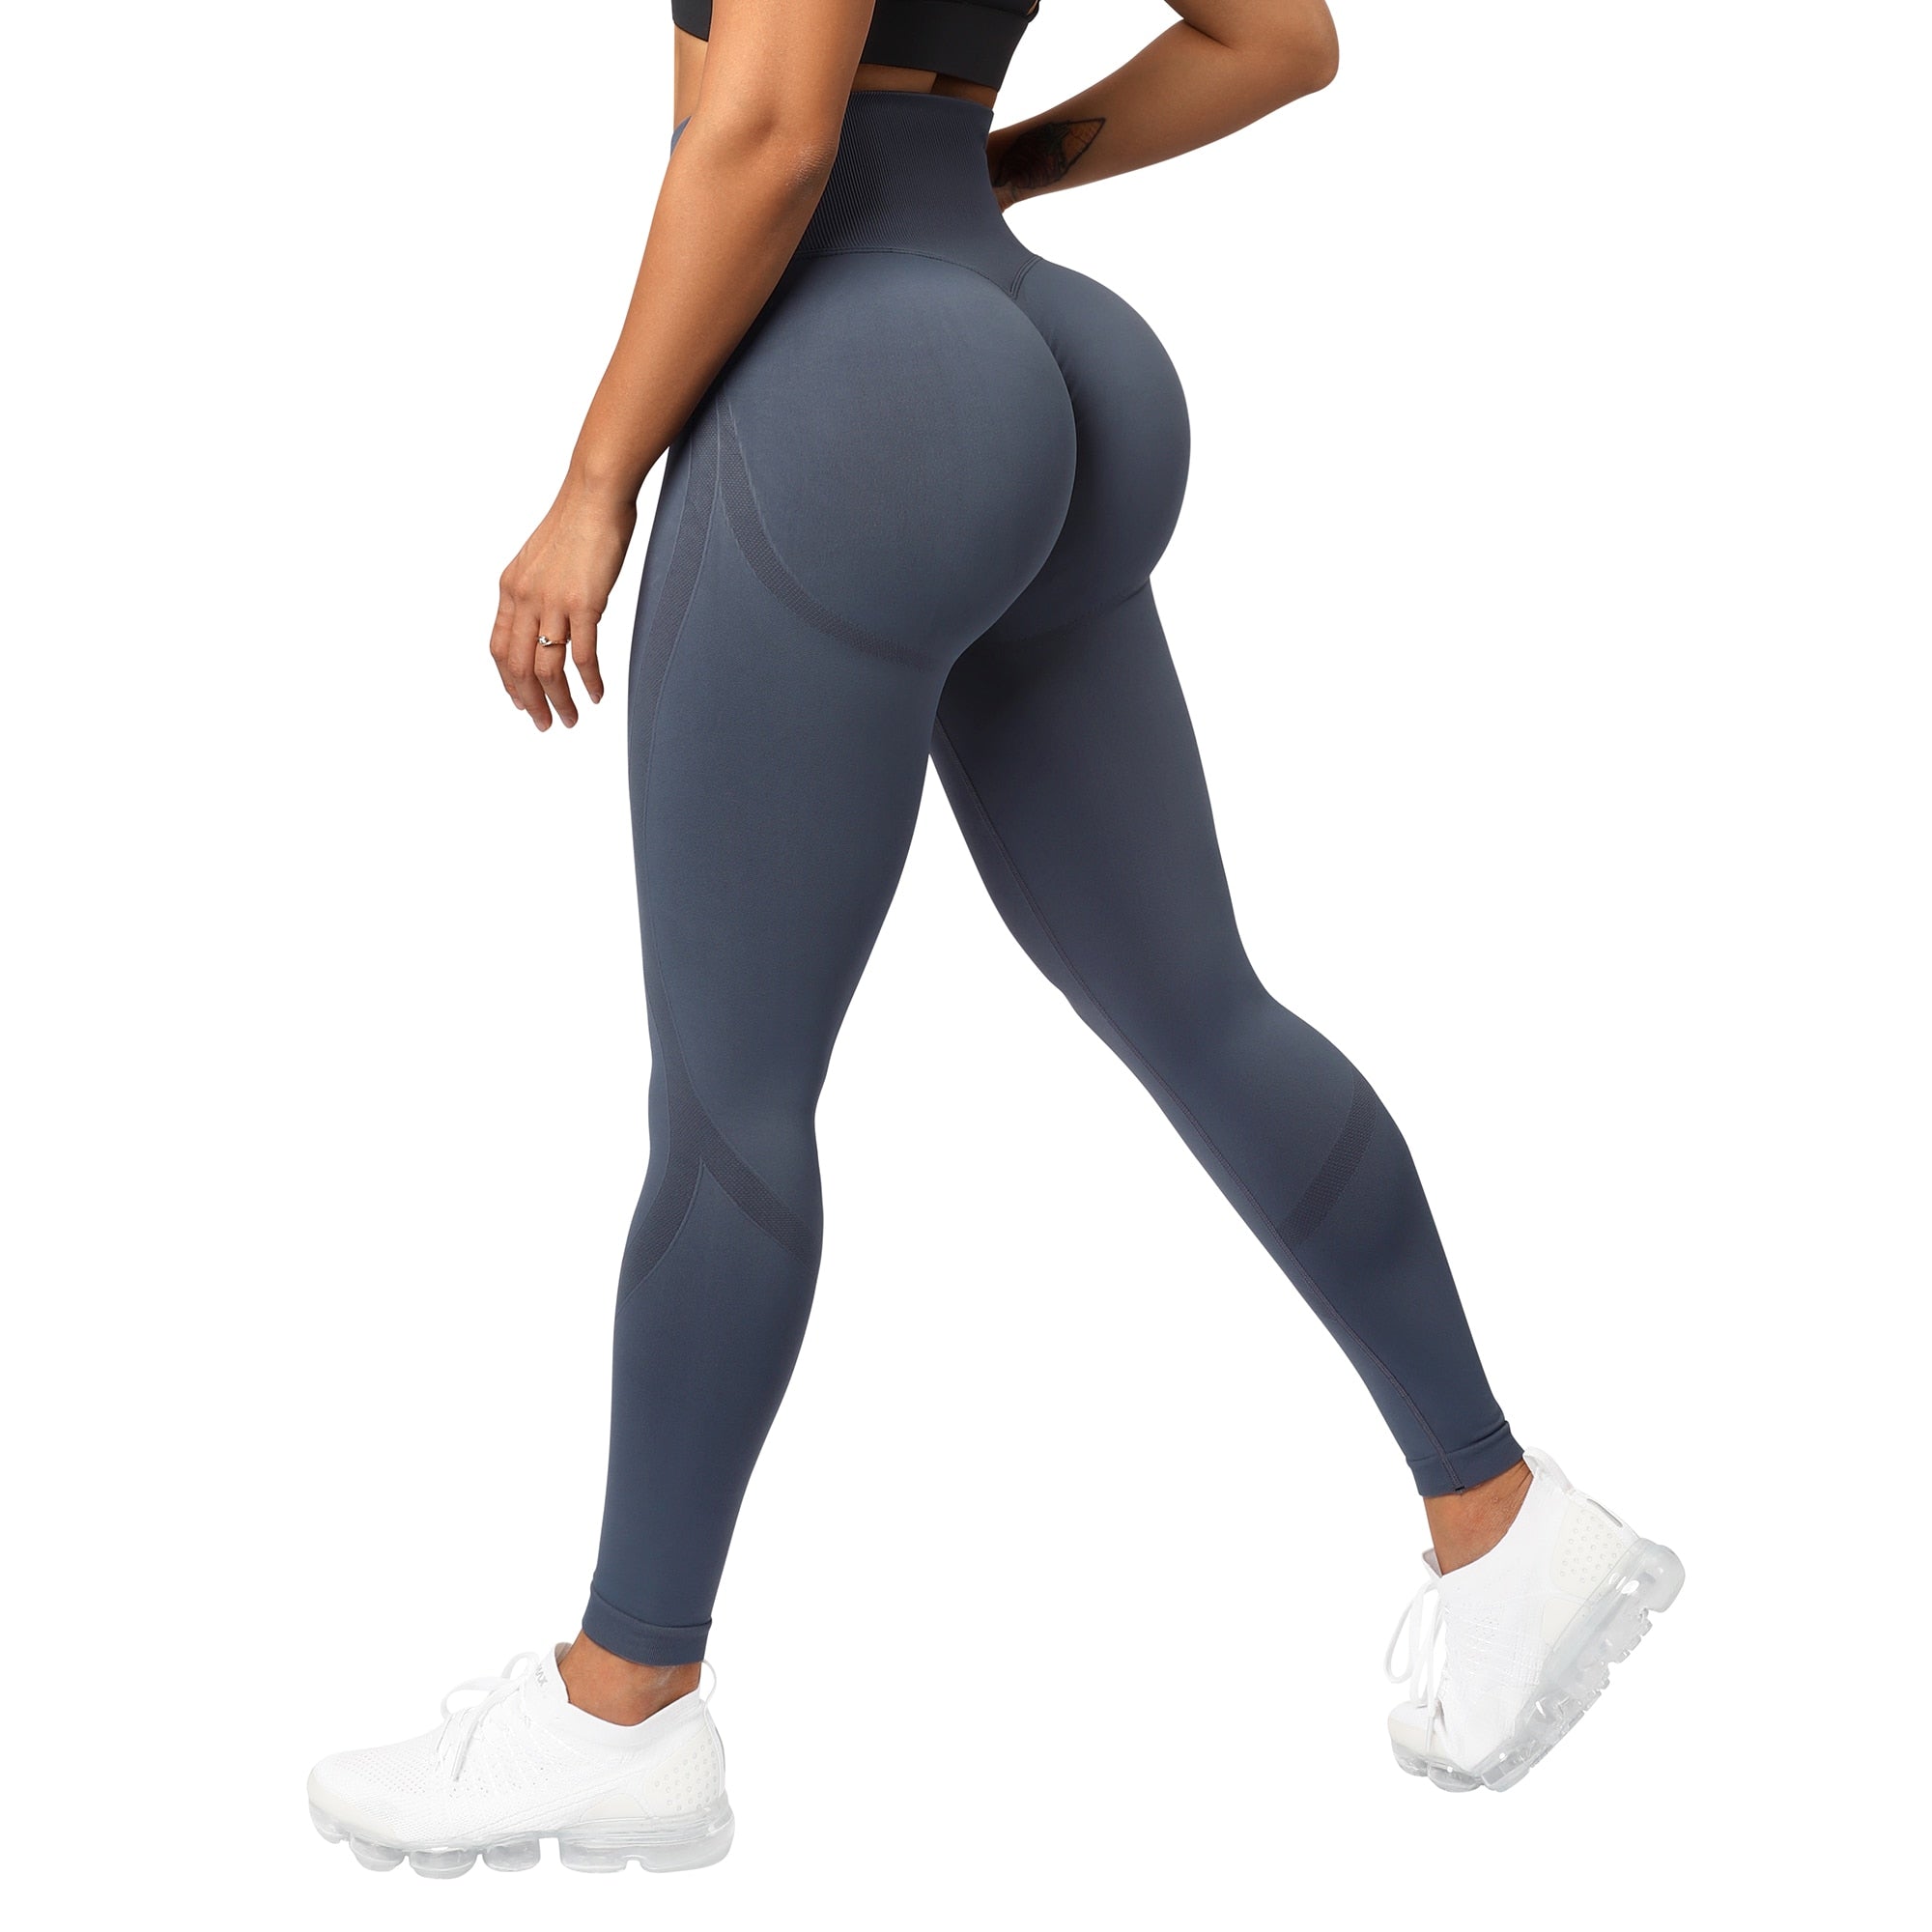 High Waist Seamless Yoga Seamless Gym Leggings For Women Push Up, Scrunch  Pants For Fitness, Workout, And Sports Style 221108 From Jin007, $12.99 |  DHgate.Com